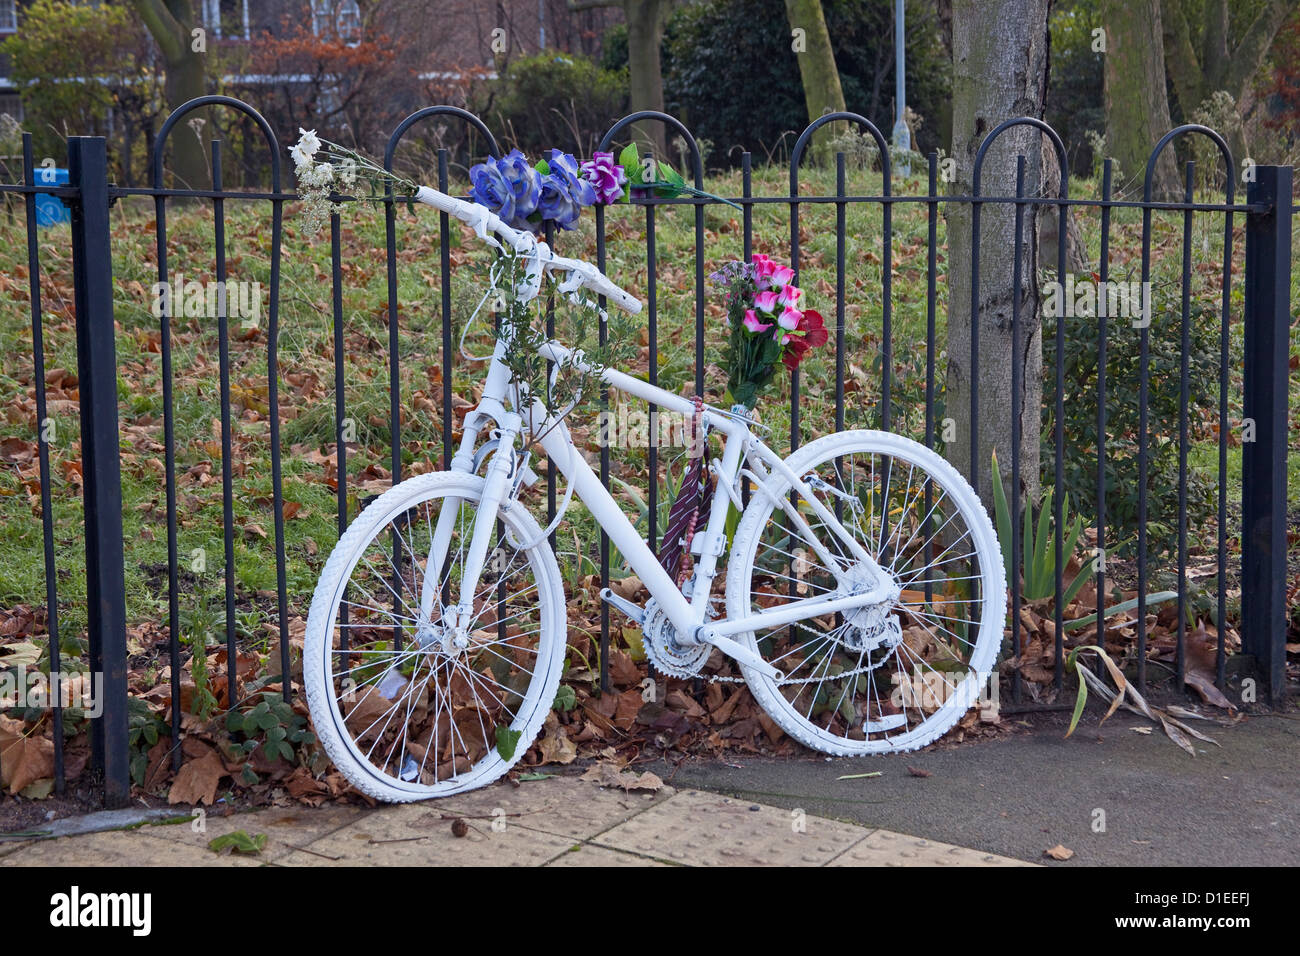 London, Deptford    A 'ghost bike' at the scene of a fatal road accident Stock Photo